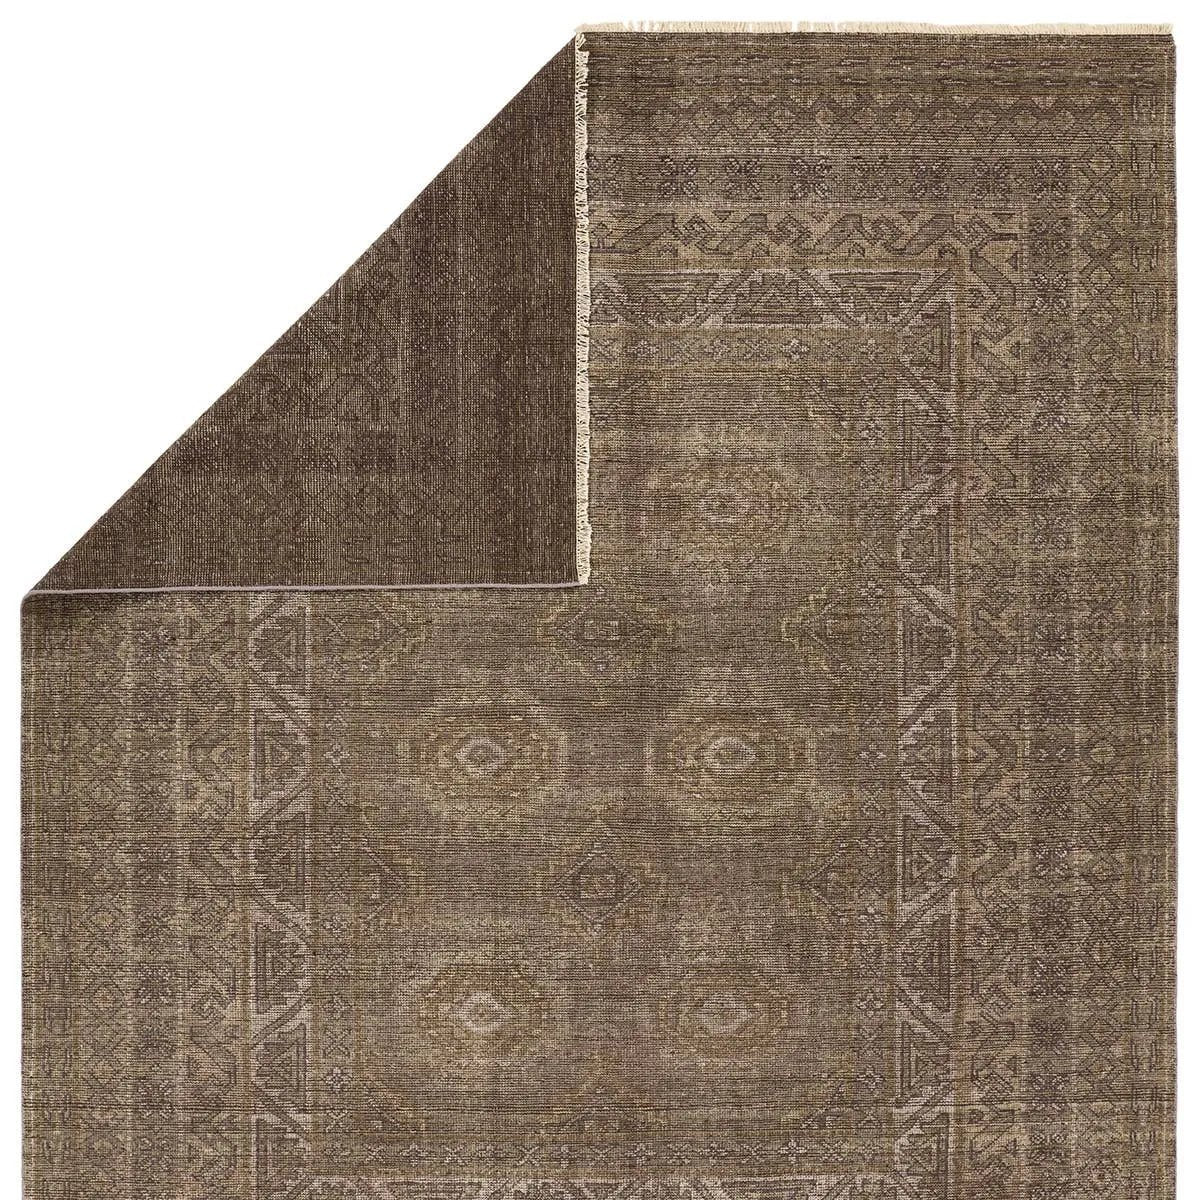 The Rhapsody Kortan features heirloom-quality designs of stunningly abrashed Old World patterns. The Kortan area rug boasts a beautifully distressed mini-medallion motif with a decorative, multi-layered border and geometric detailing. The brown, cream, and tan hues add depth and intrigue. Amethyst Home provides interior design, new home construction design consulting, vintage area rugs, and lighting in the Nashville metro area.